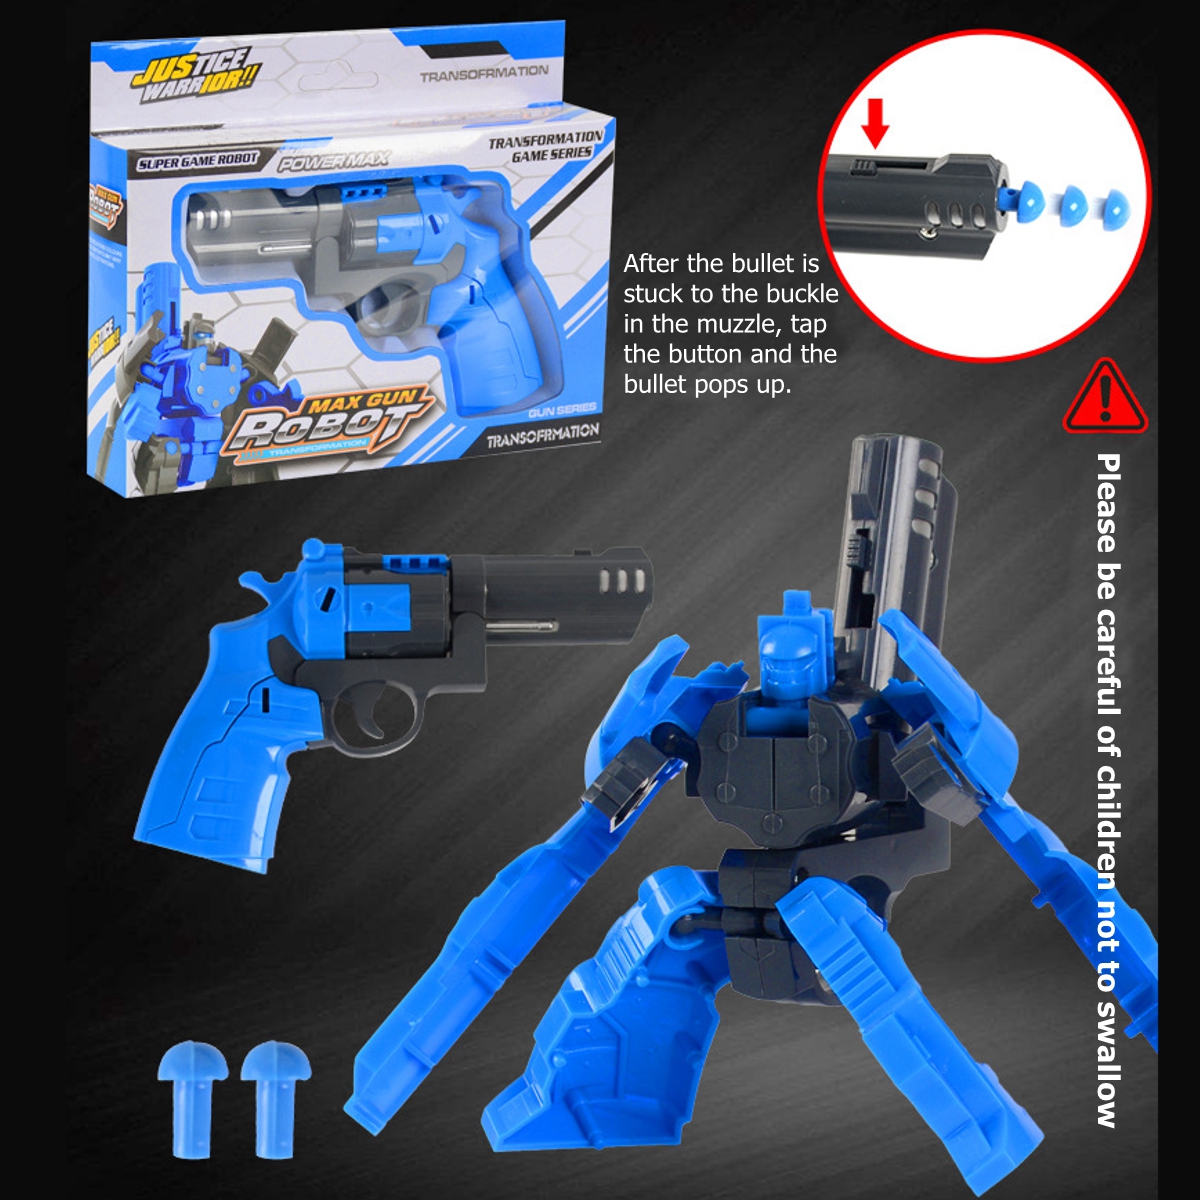 Children's Deformation Pistol Robot Toy Puzzle DIY Assembly Toy Christmas Gift